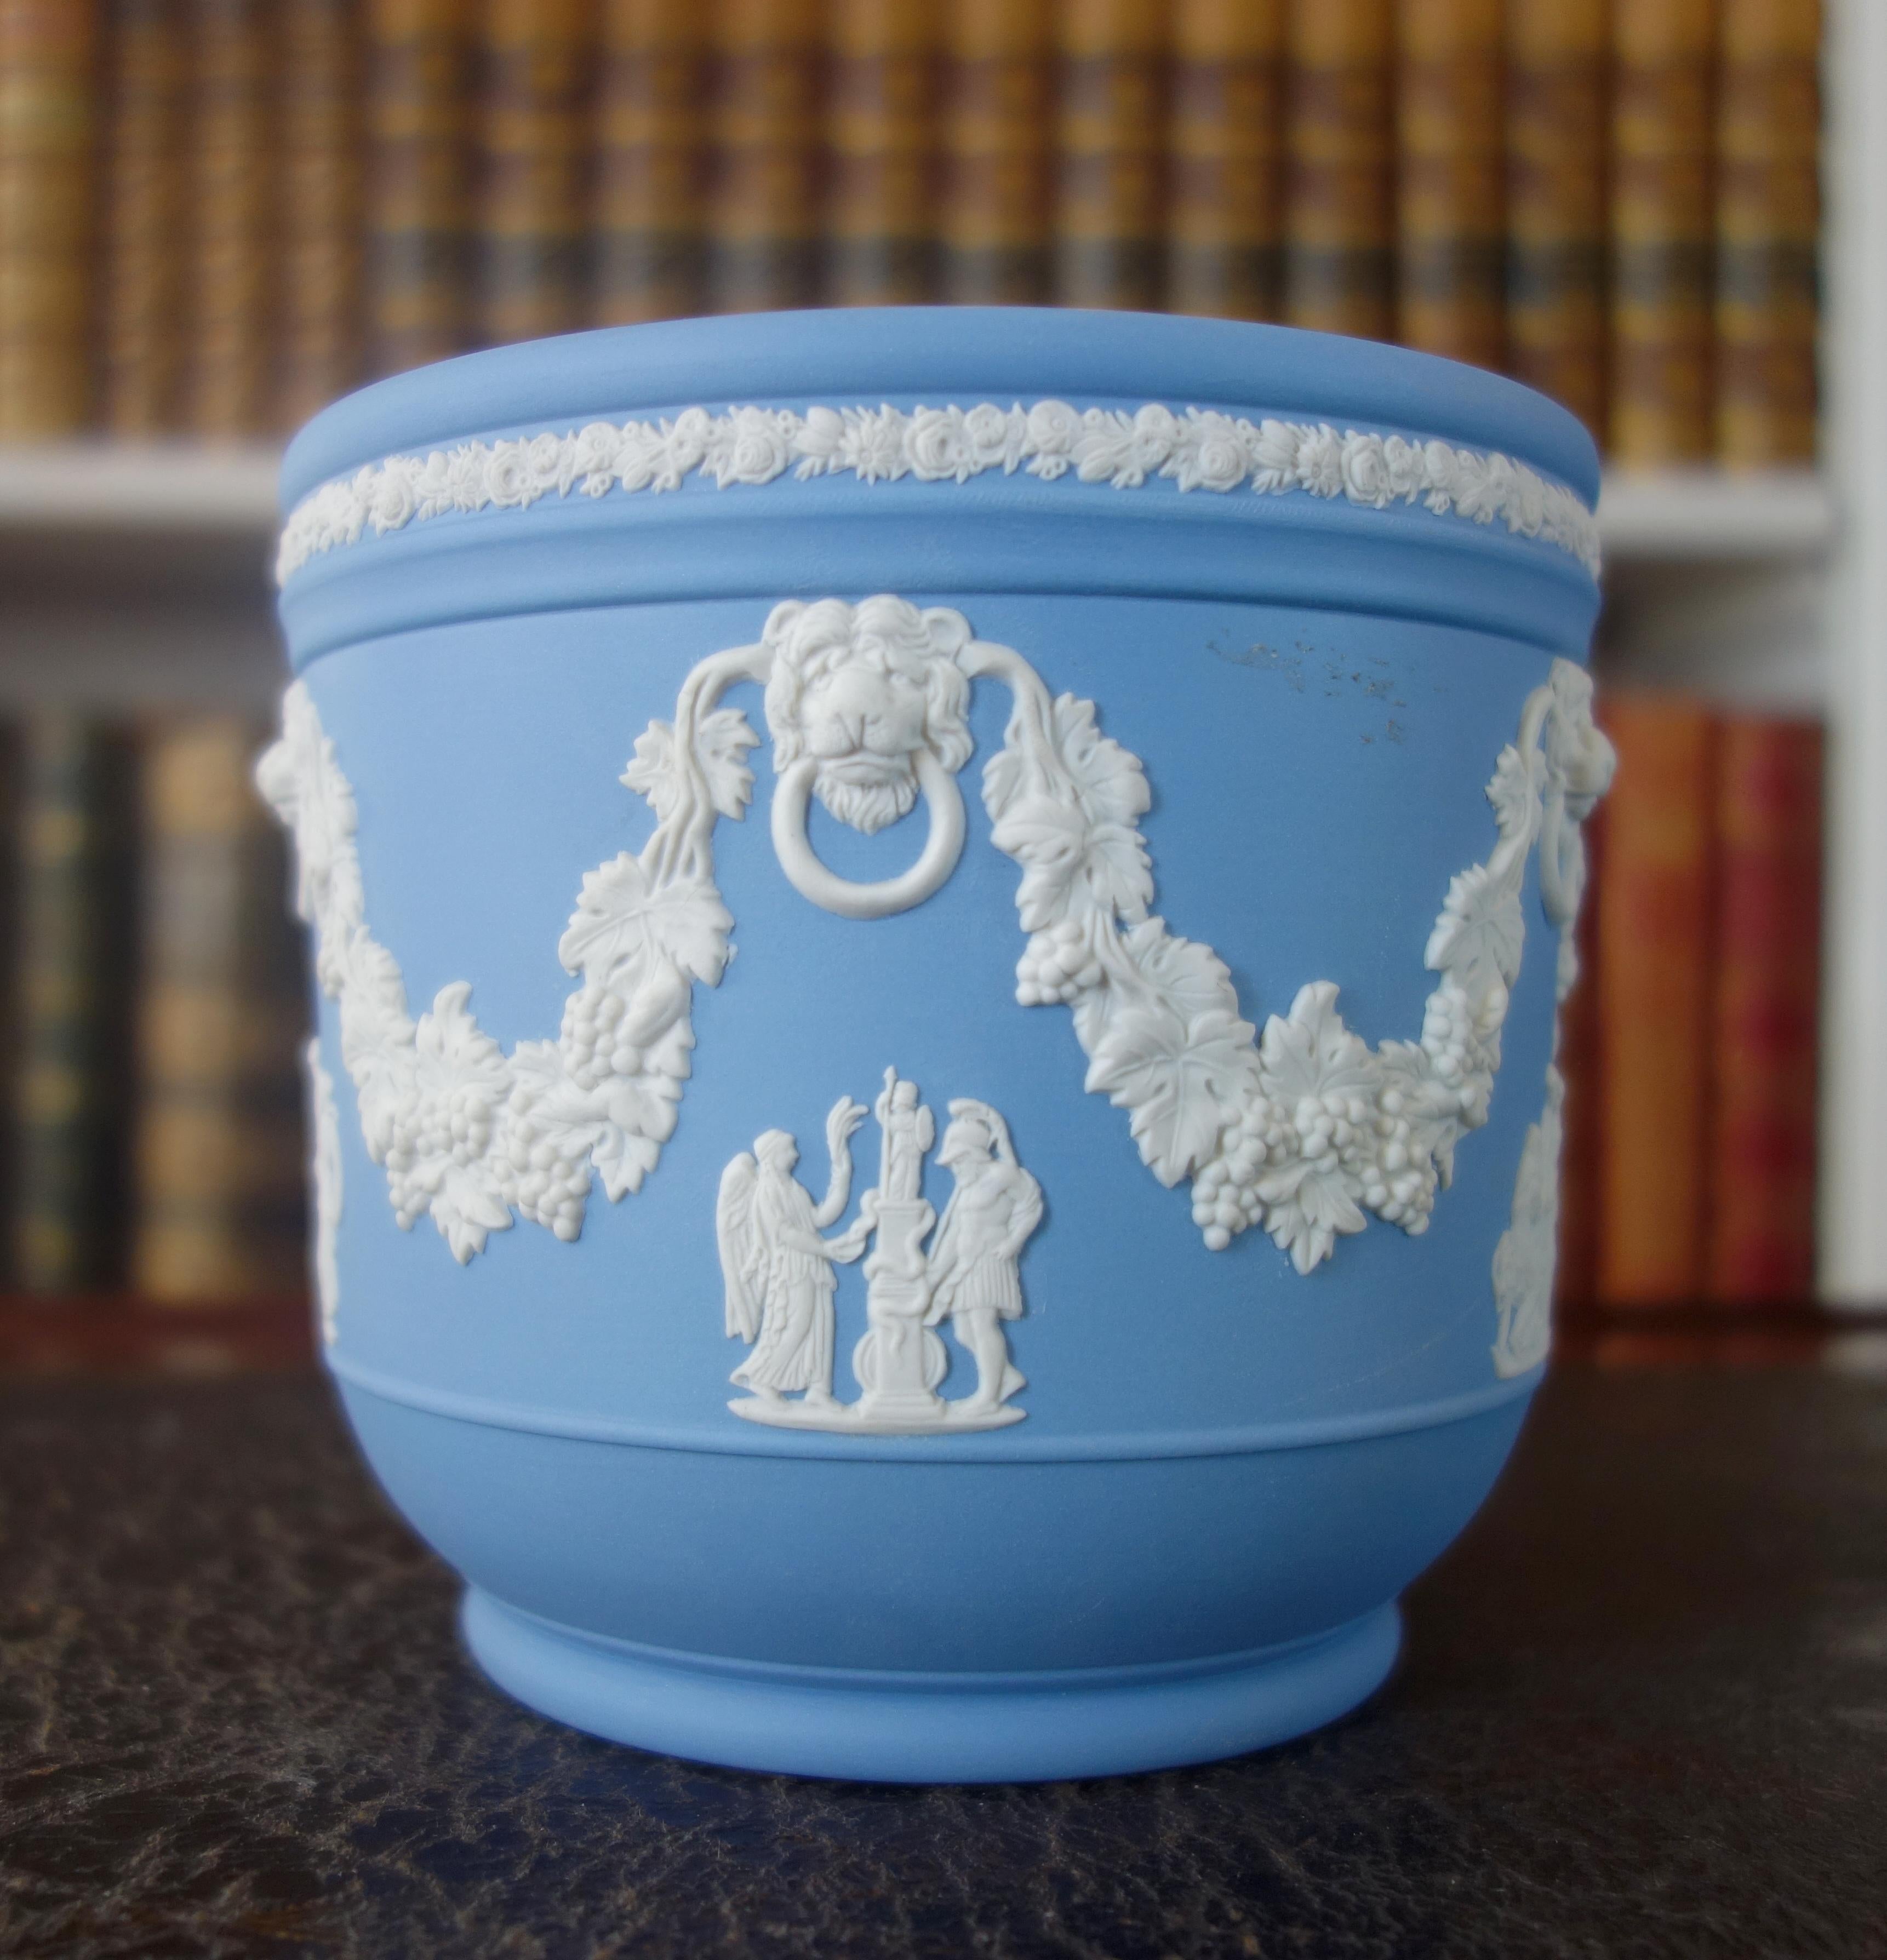 Large Wedgwood jasperware planter, beautiful neoclassical style item decorated with white antique-style scenes on a sky-blue background.
Second half of 20th century refined and highly decorative item that reminds 18th century refinement.
It is in